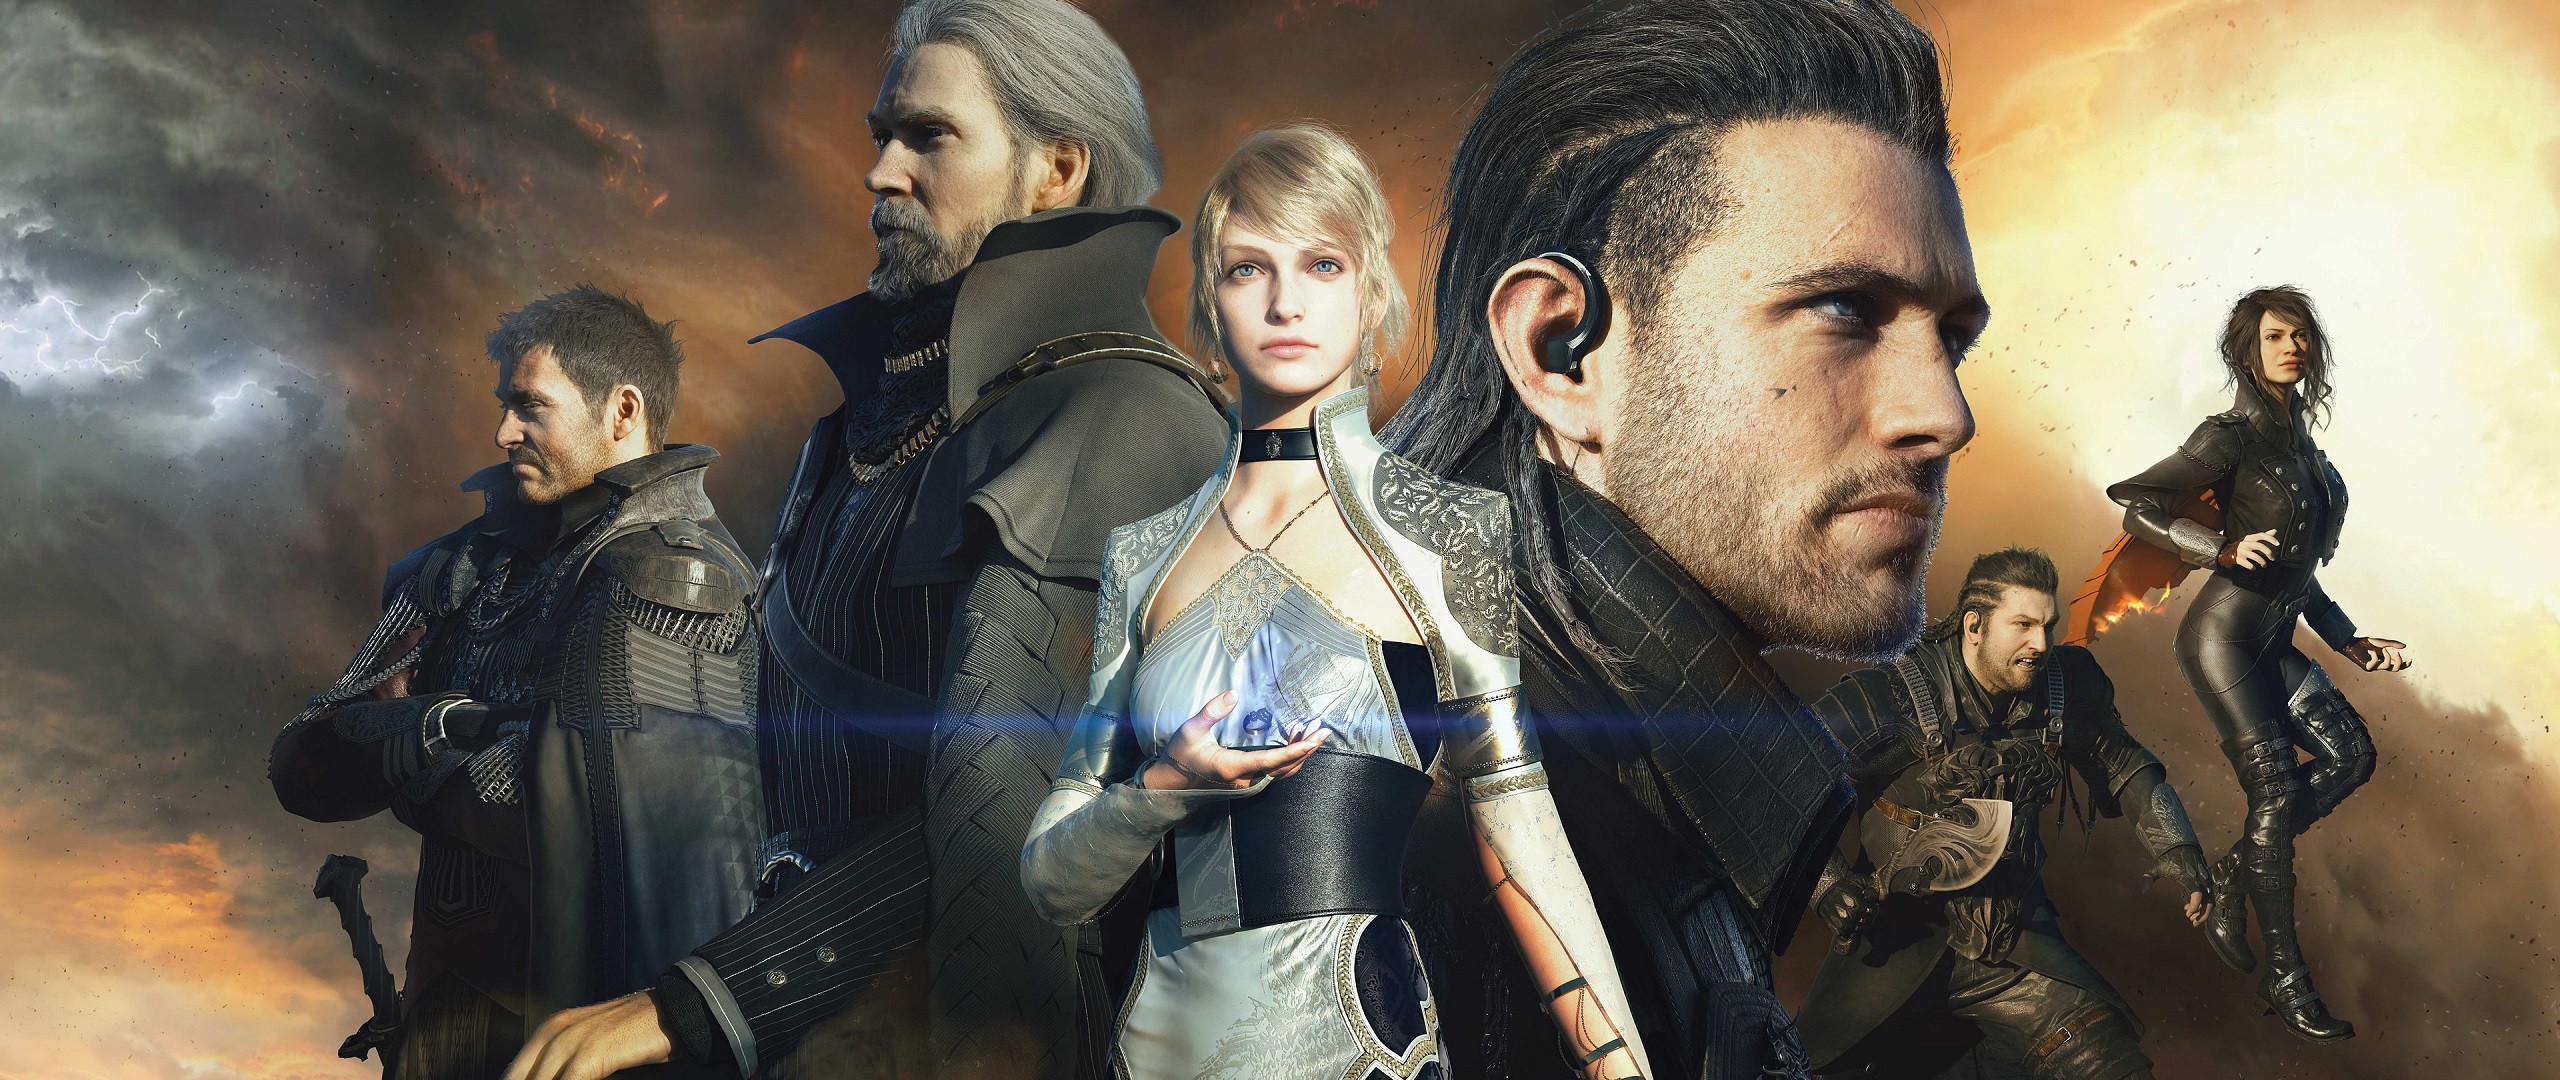 2560x1080 5 Kingsglaive: Final Fantasy XV HD Wallpapers | Backgrounds - Wallpaper  Abyss